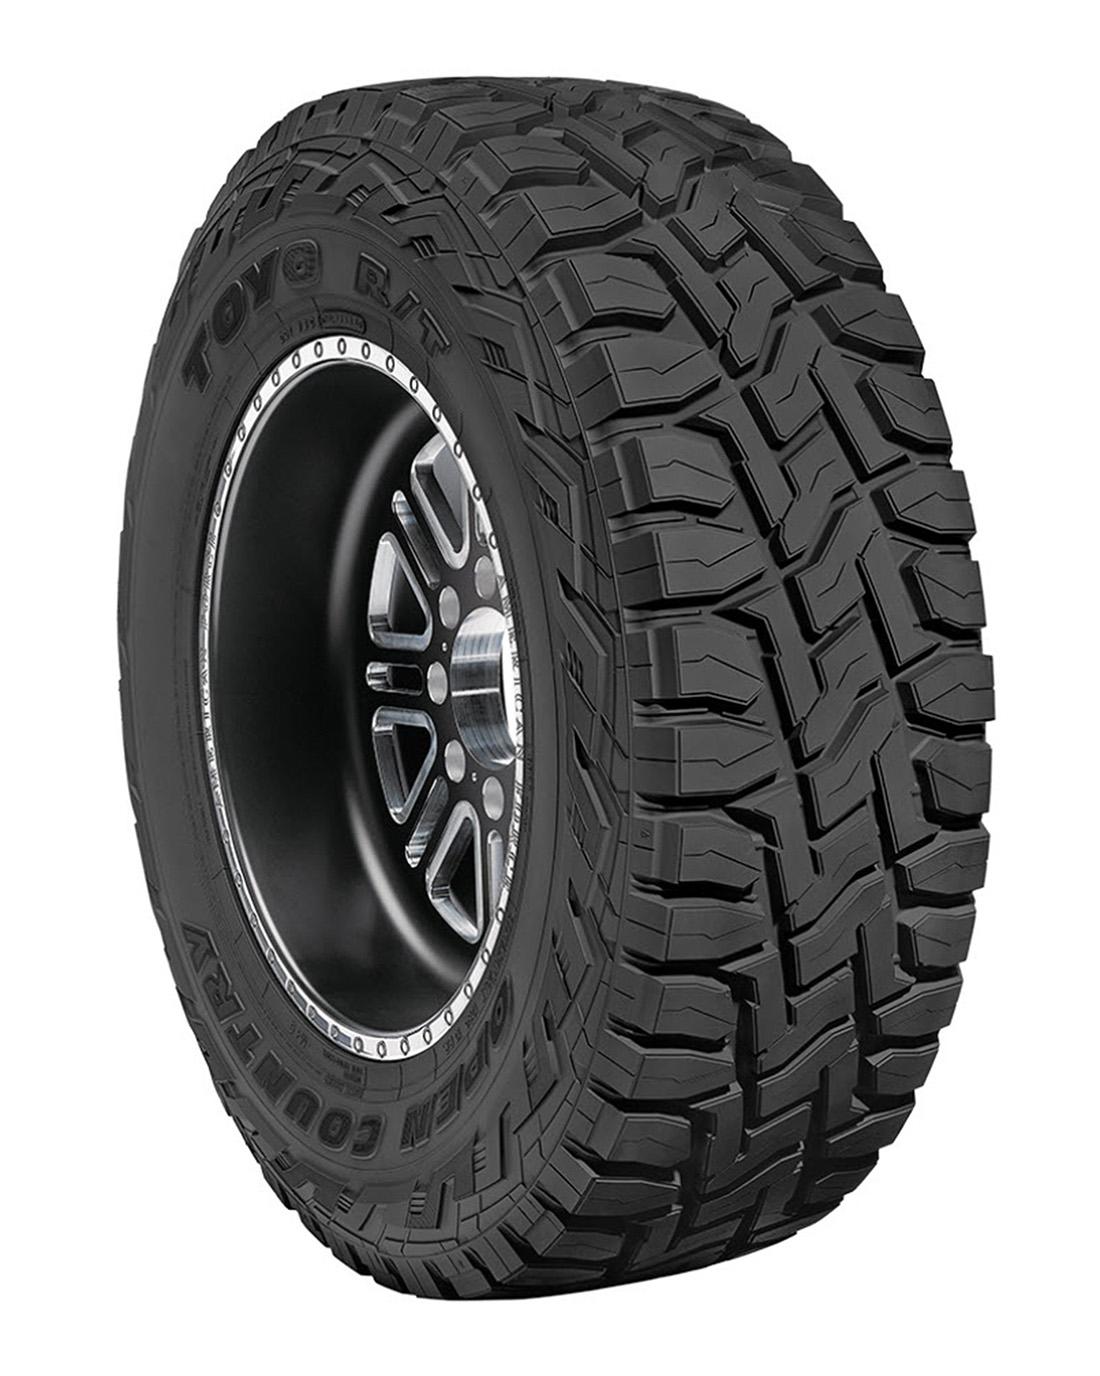 Toyo - OPEN COUNTRY RT  NW  265/75R16